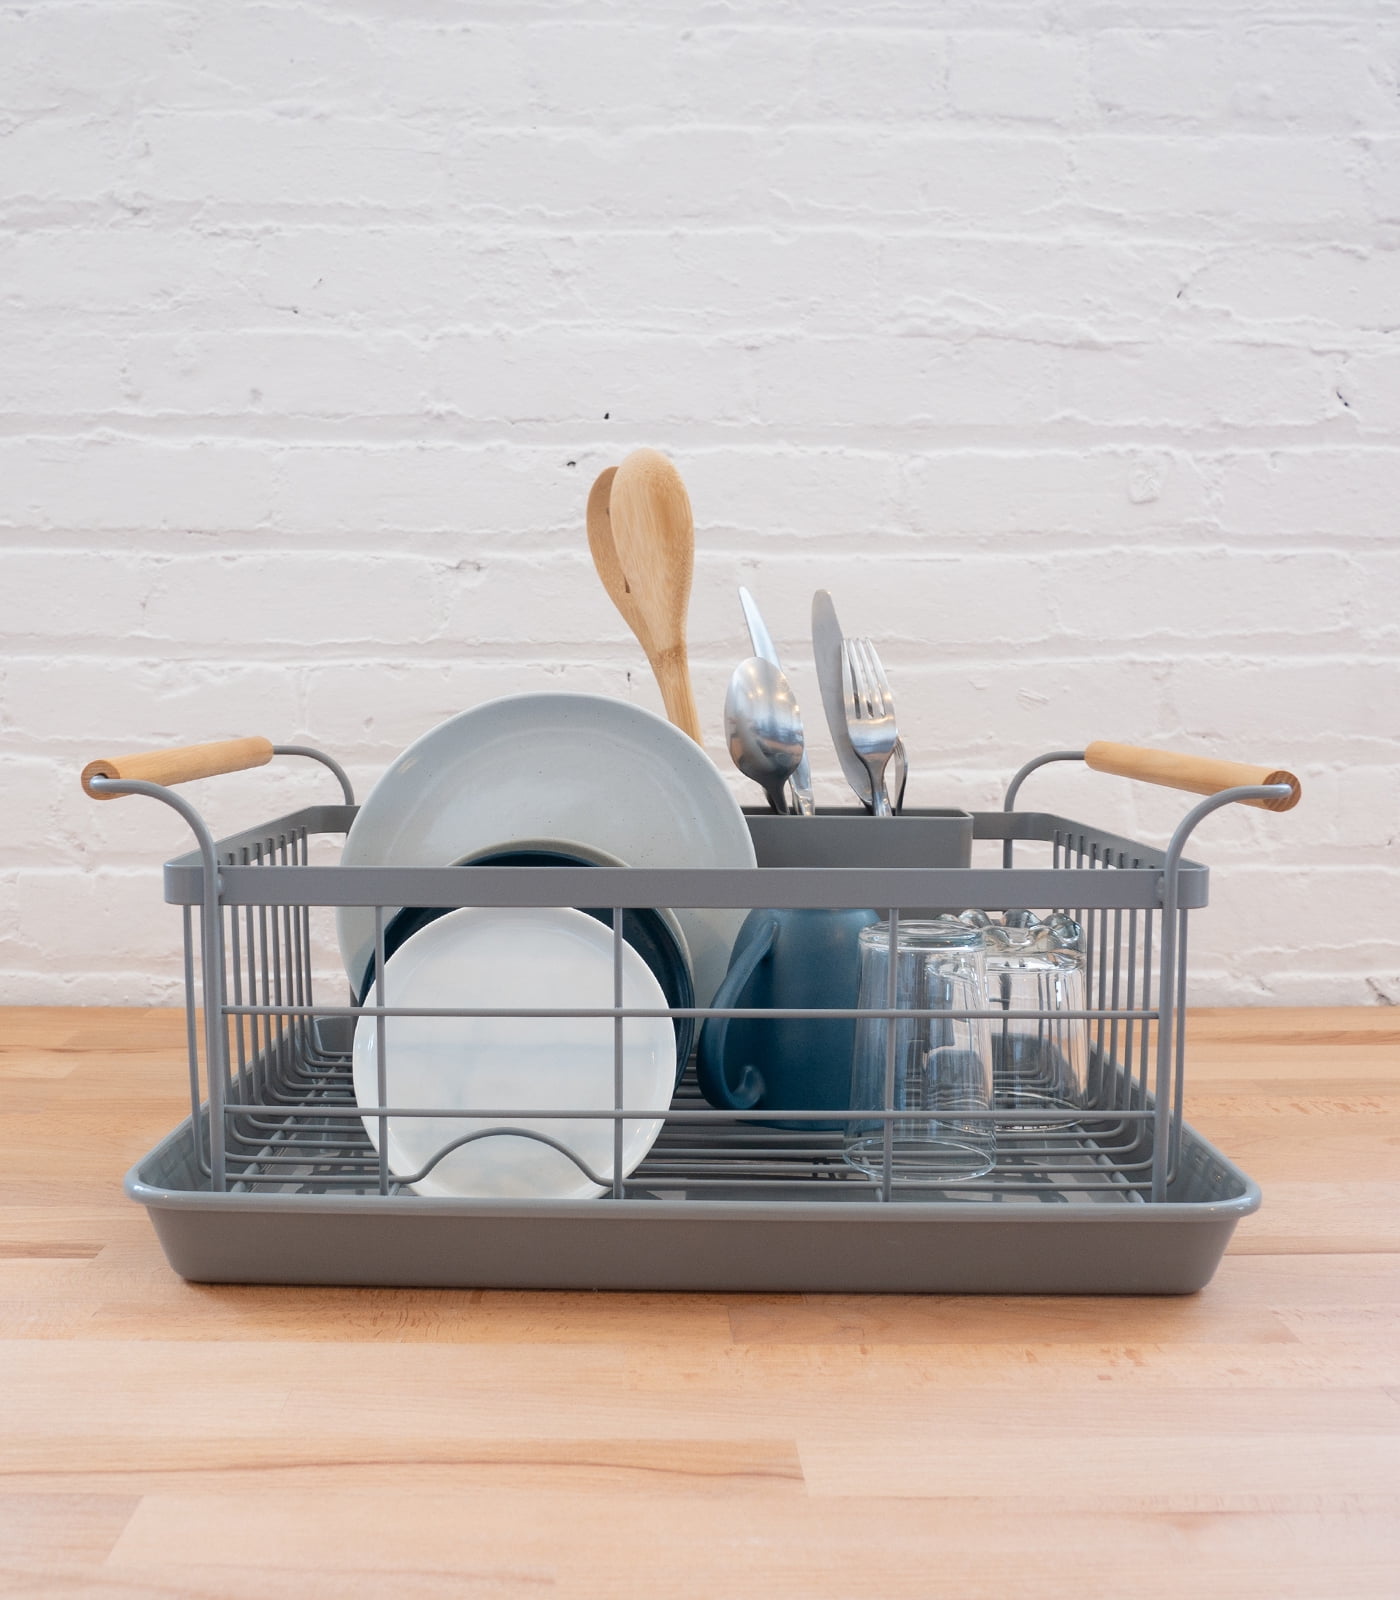 Kitidy All-in-One Portable Dish Drying Rack - Store And Dry Plates, Bowls,  Mugs, Glasses, Knives, Utensils In One Place